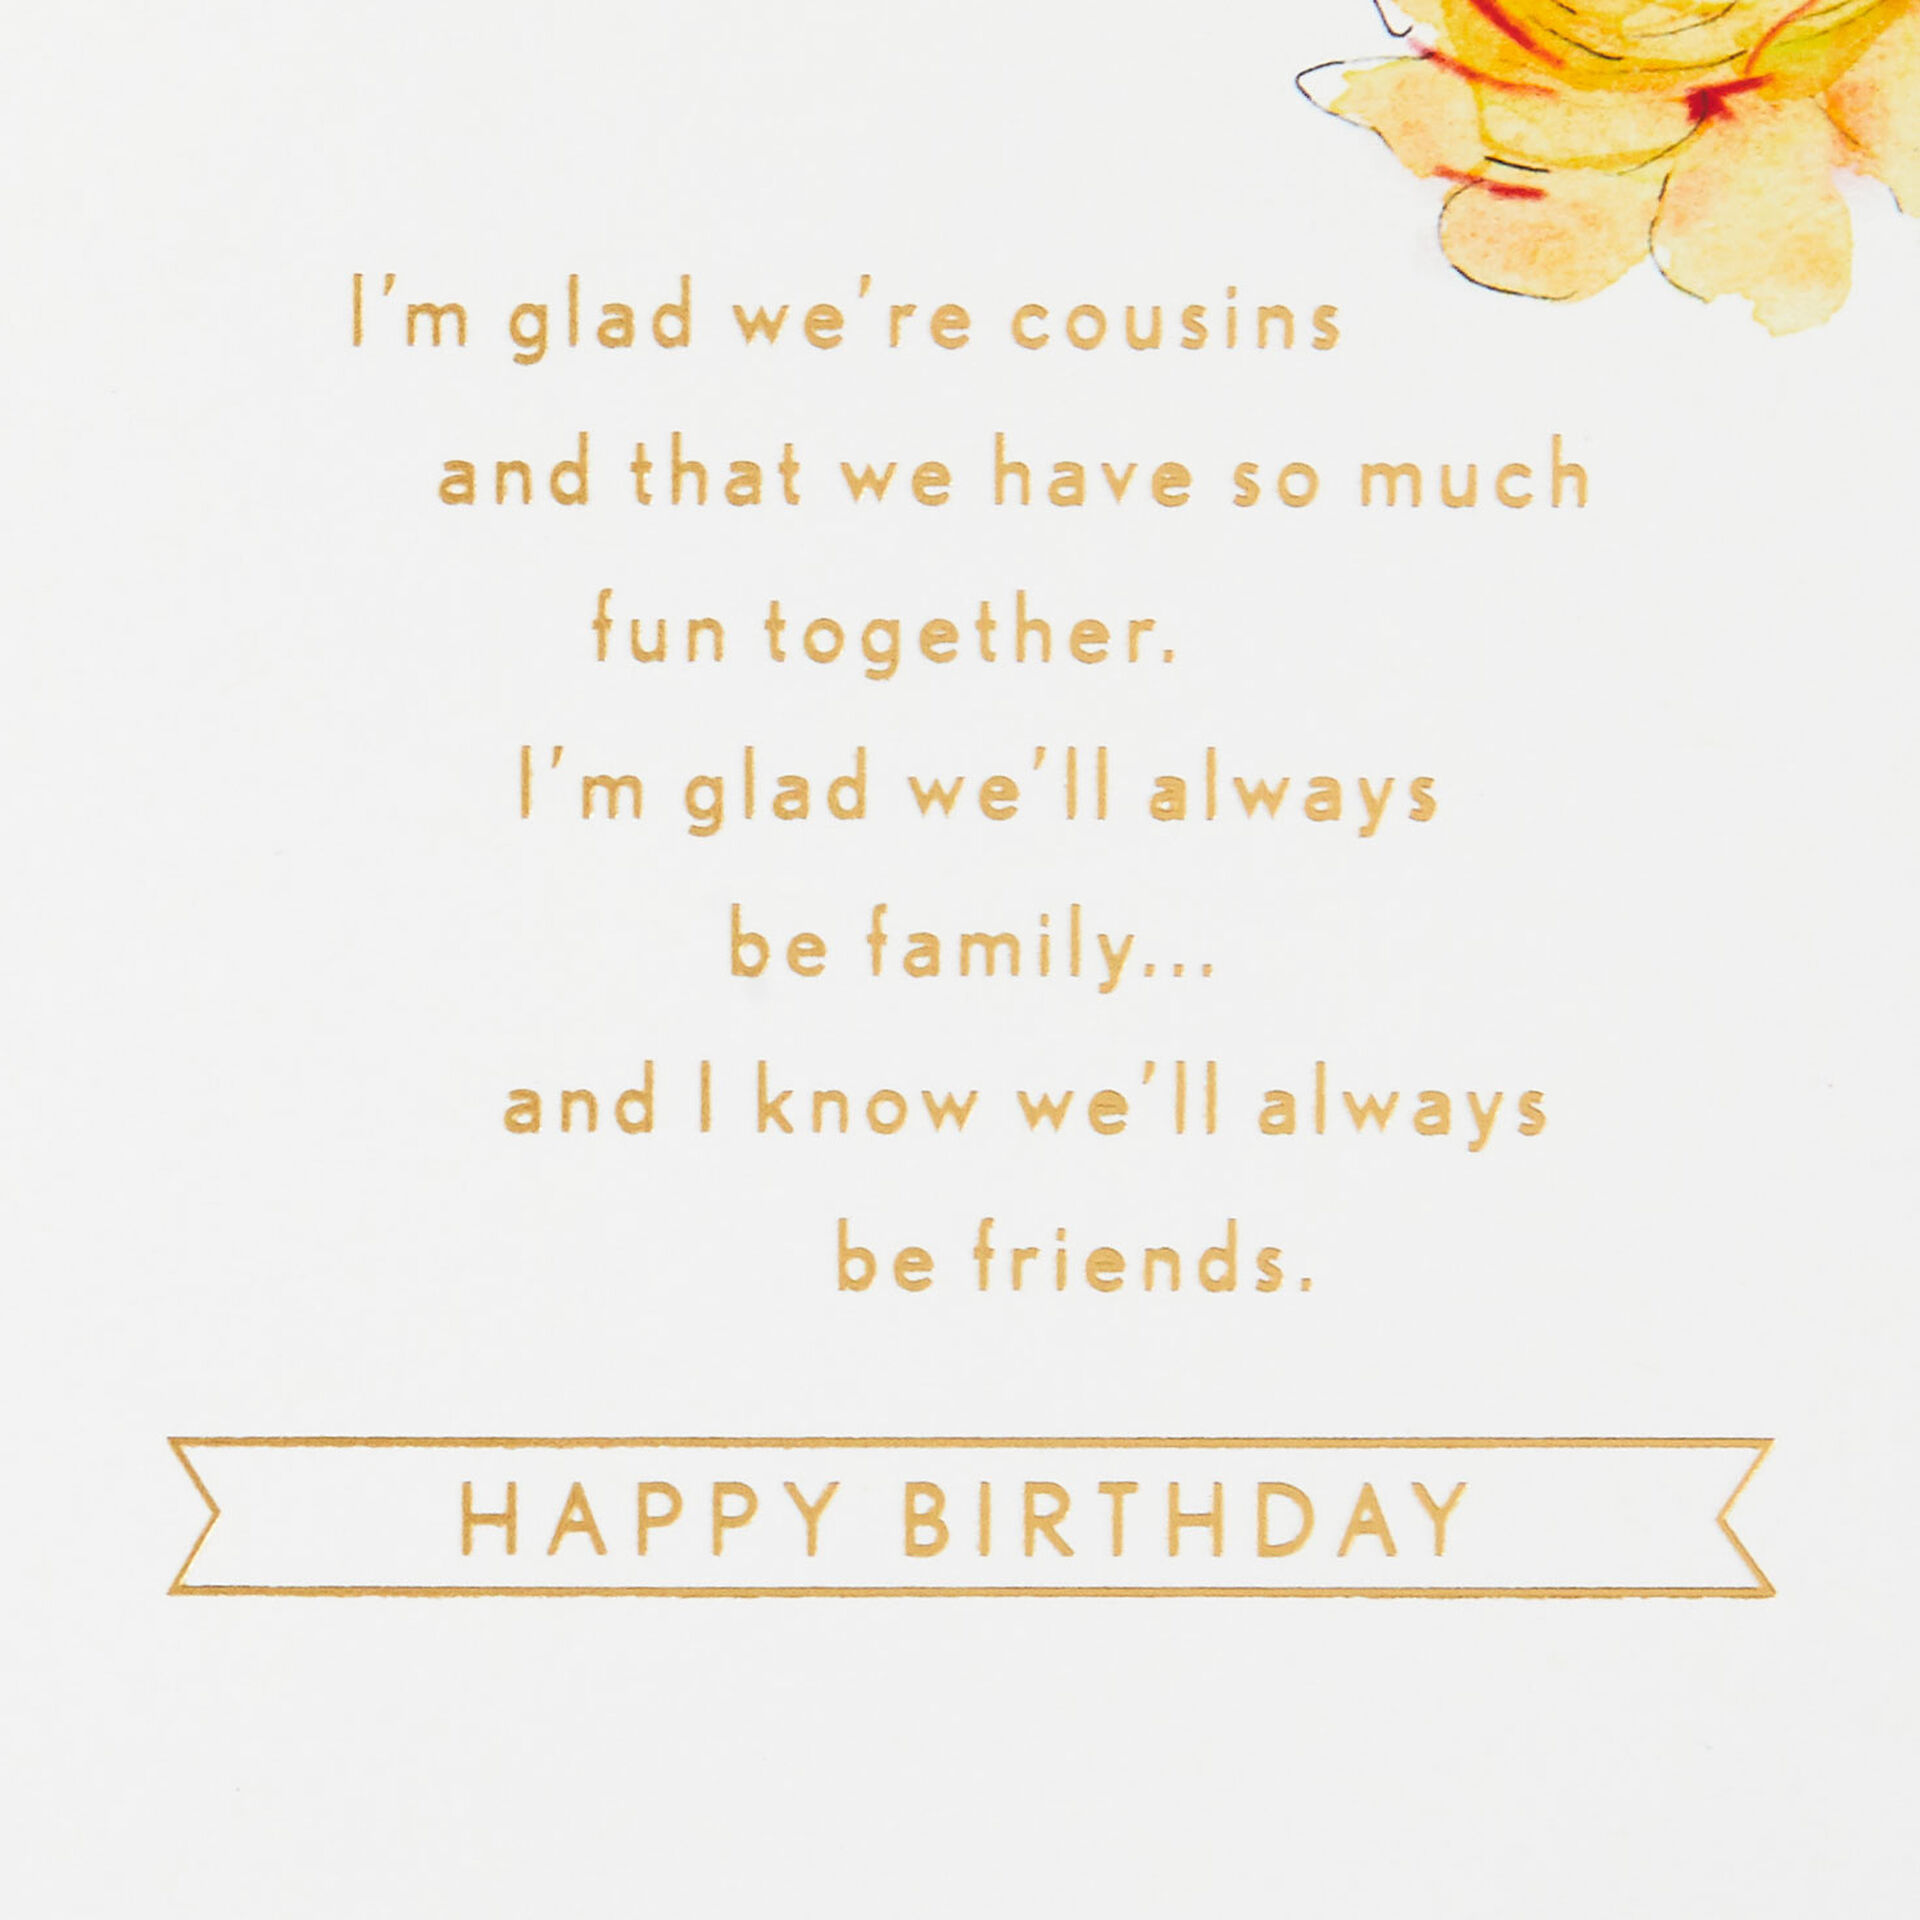 Yellow-Roses-for-Friendship-Birthday-Card-for-Cousin_399FBD3981_03